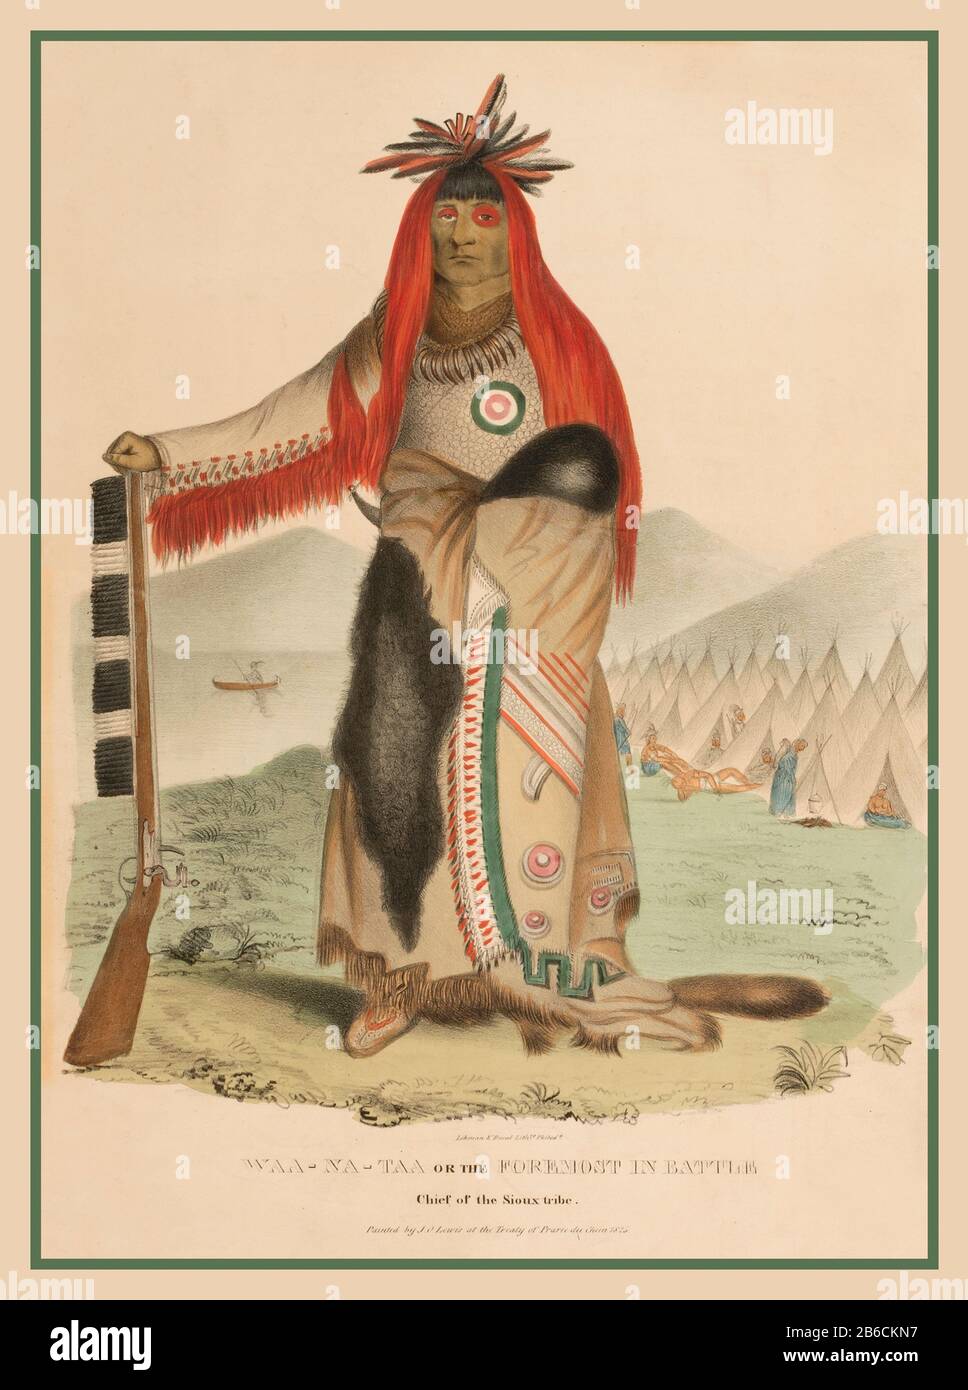 Vintage 1850s Lithograph of Waa-na-taa, Foremost in Battle, Chief of the Sioux Tribe by artist James Otto Lewis, Philadelphia, PA  Sitter Waa-na-taa Chief Sioux Tribe Native American Graphic Art Print Illustration Colour Lithograph Graphic Ethnic IndianSioux Tribe Stock Photo